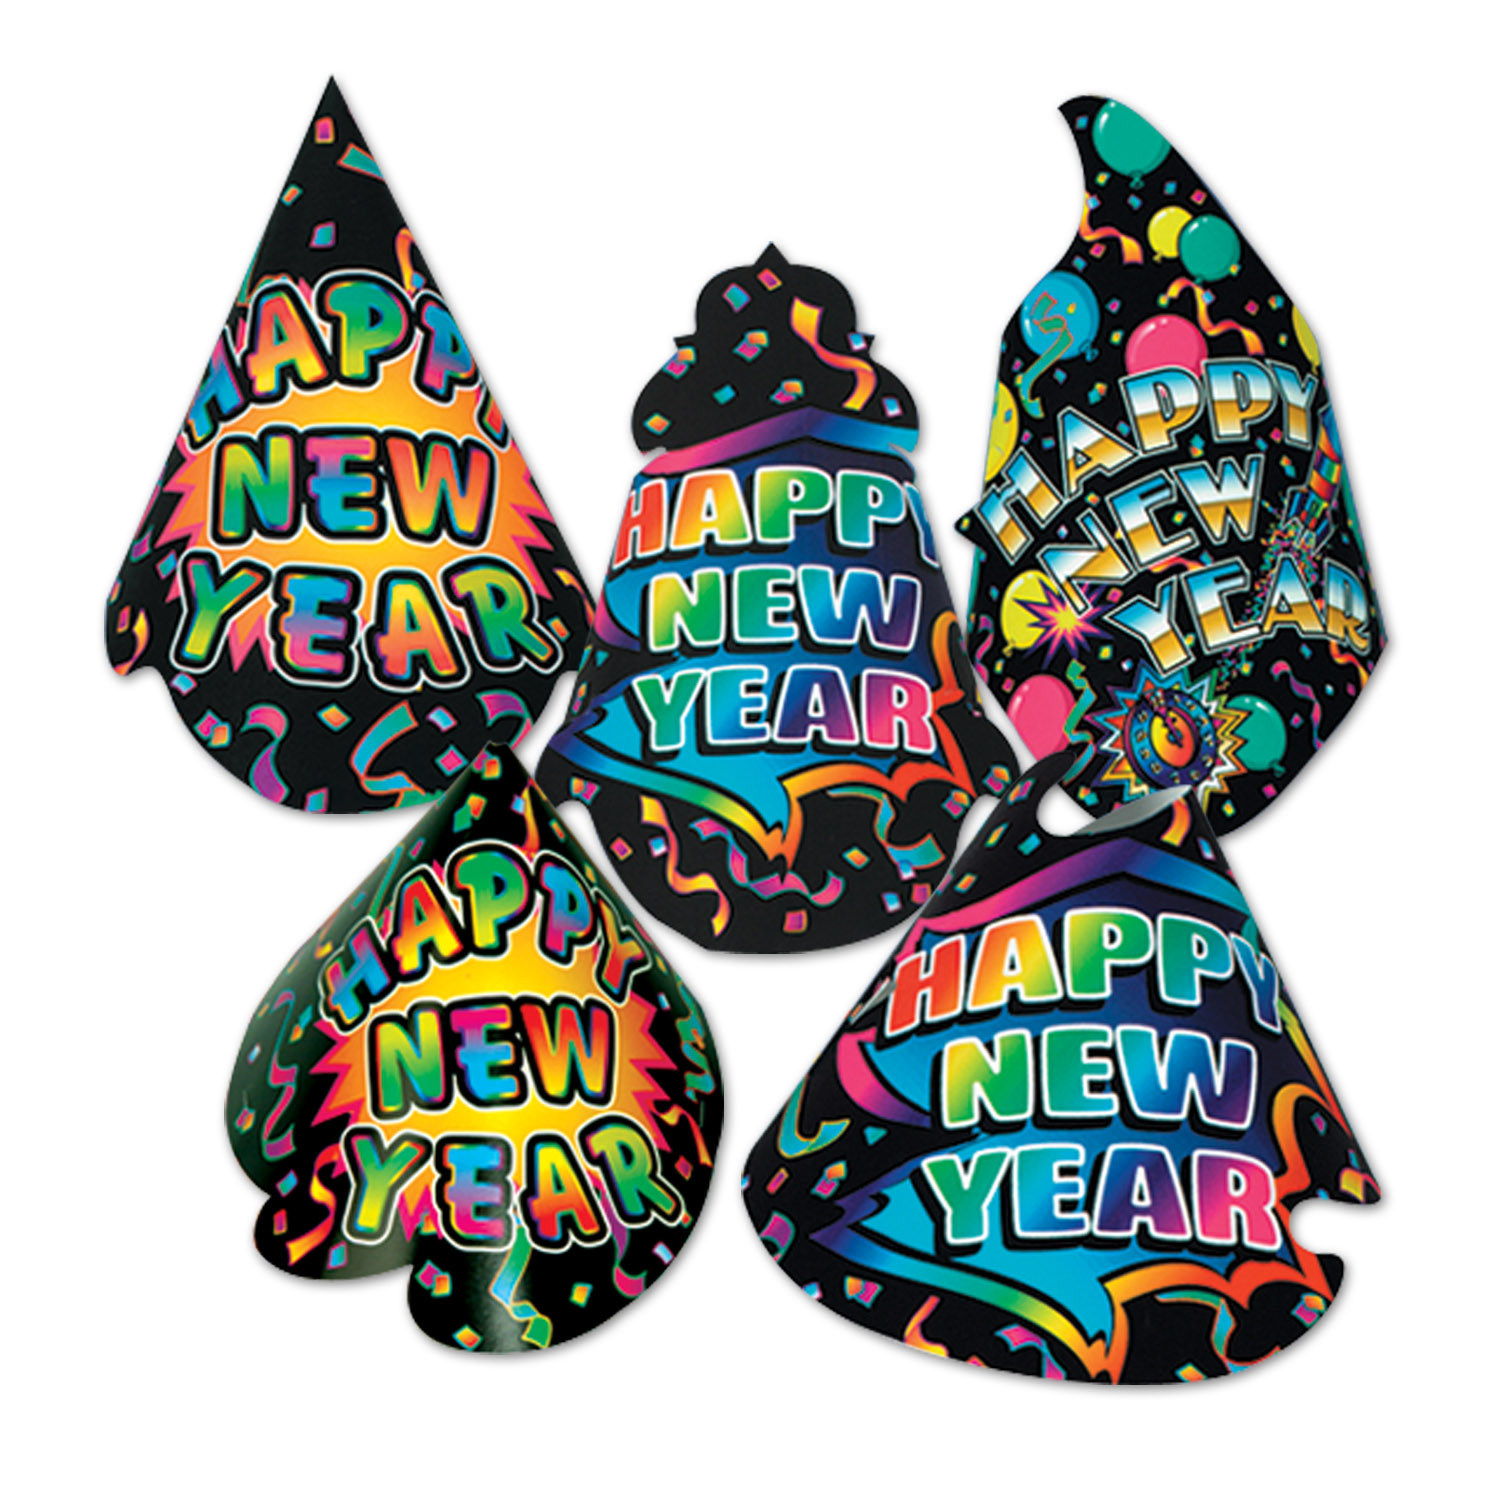 Traditional party hats with vibrant colors and reads "Happy New Year".